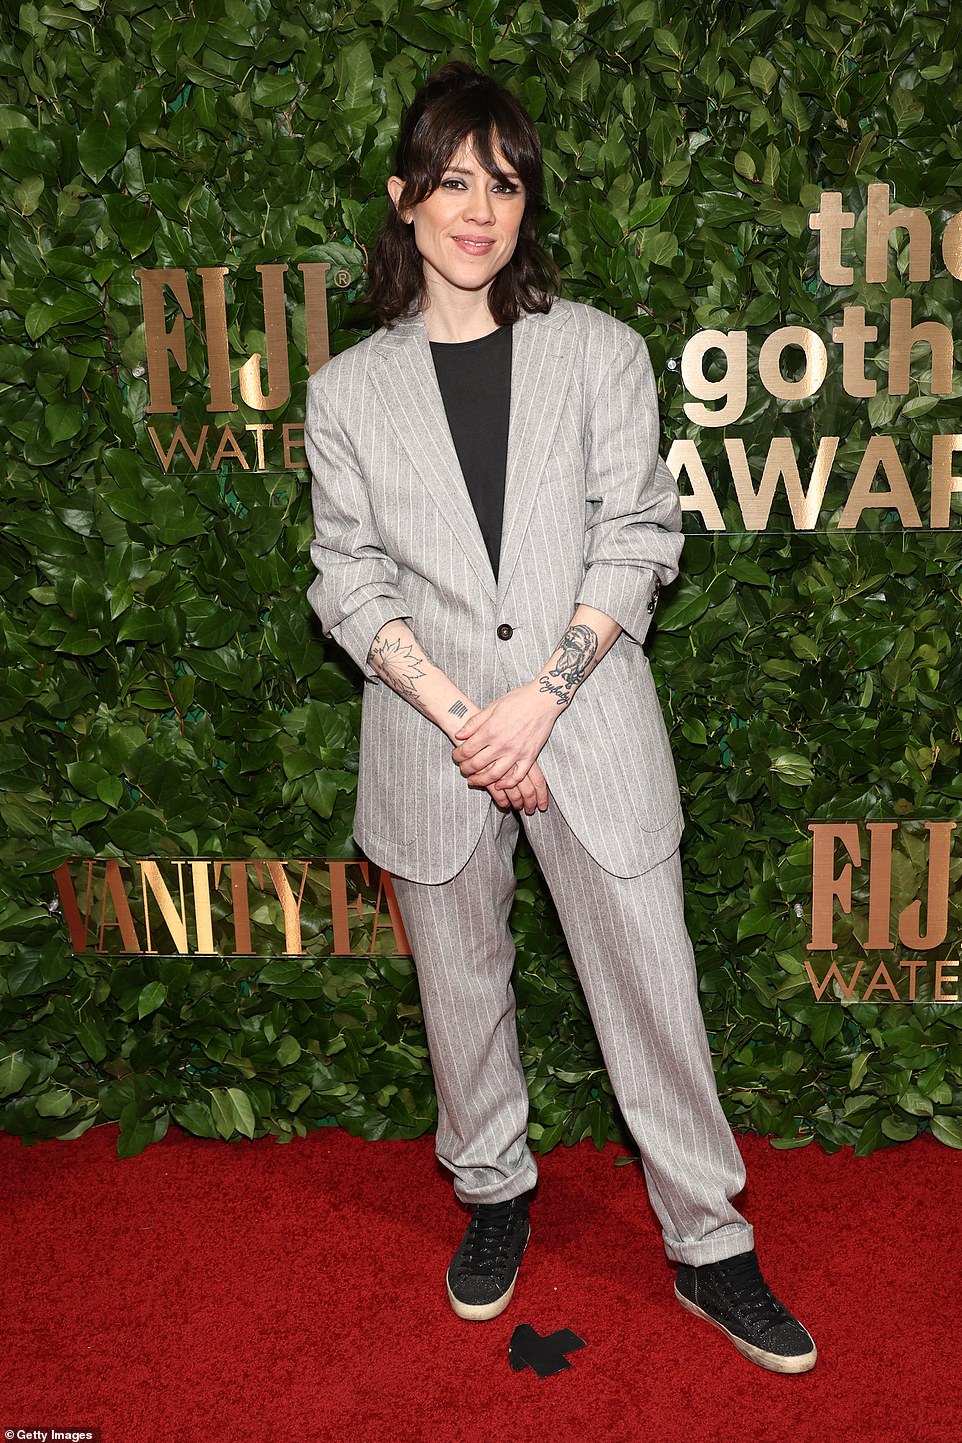 Tegan Quin wore a grey and white striped suit and sneakers